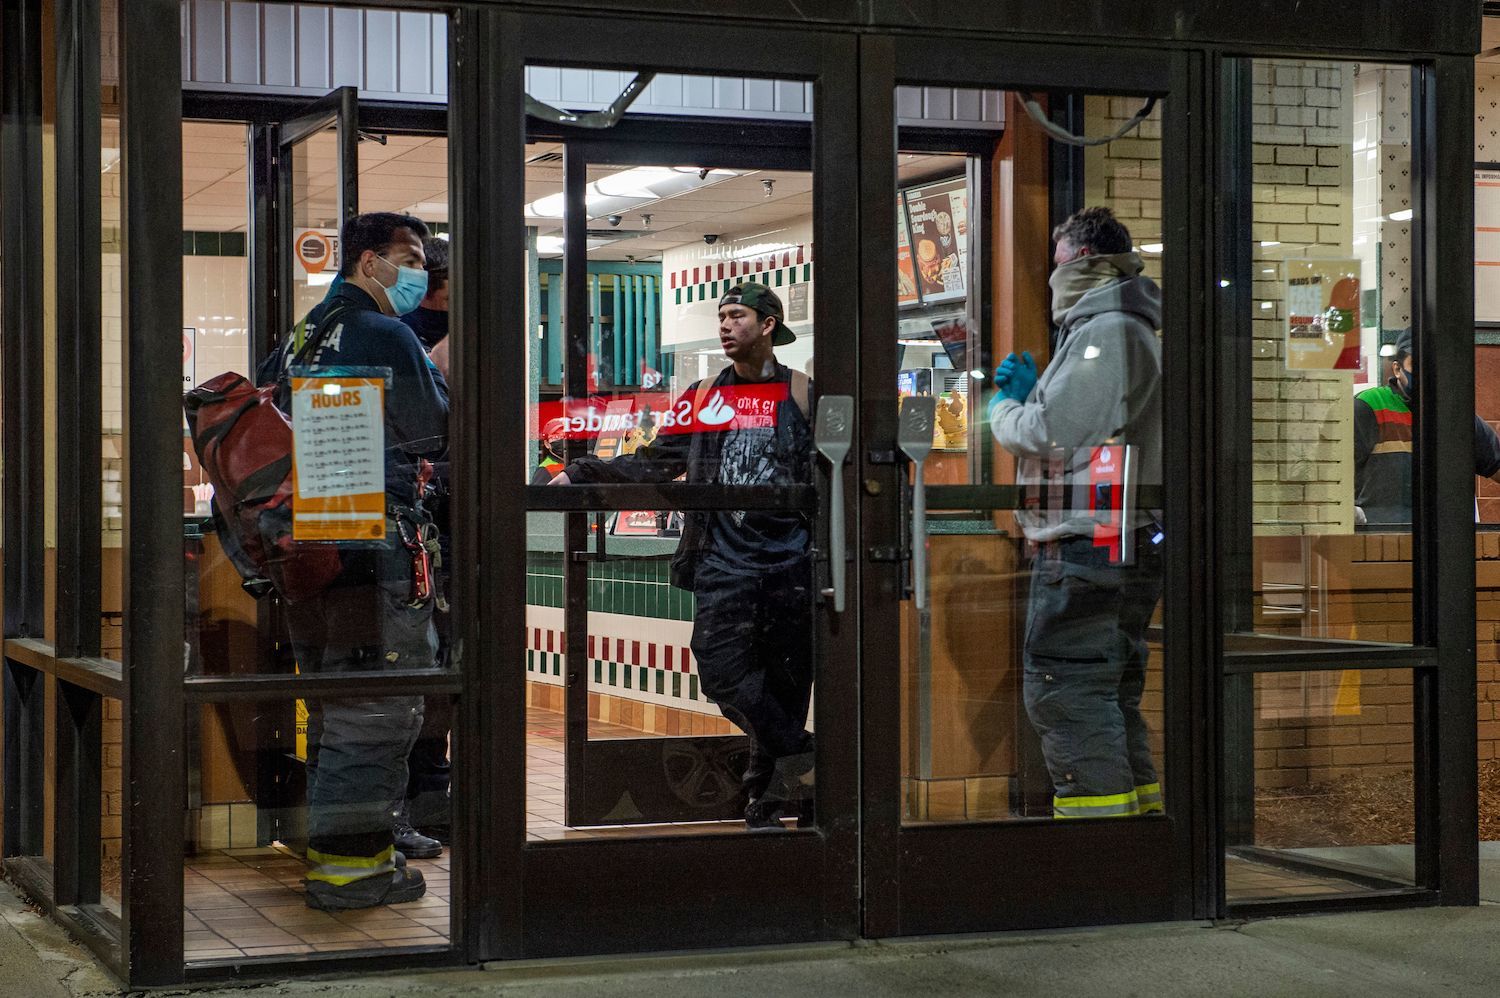 Officers speak to a Burger King employee that was punched in the face by an angry customer, asking him questions to find out more about what happened and if he needed medical attention in Chelsea, Massachusetts on May 1, 2021.